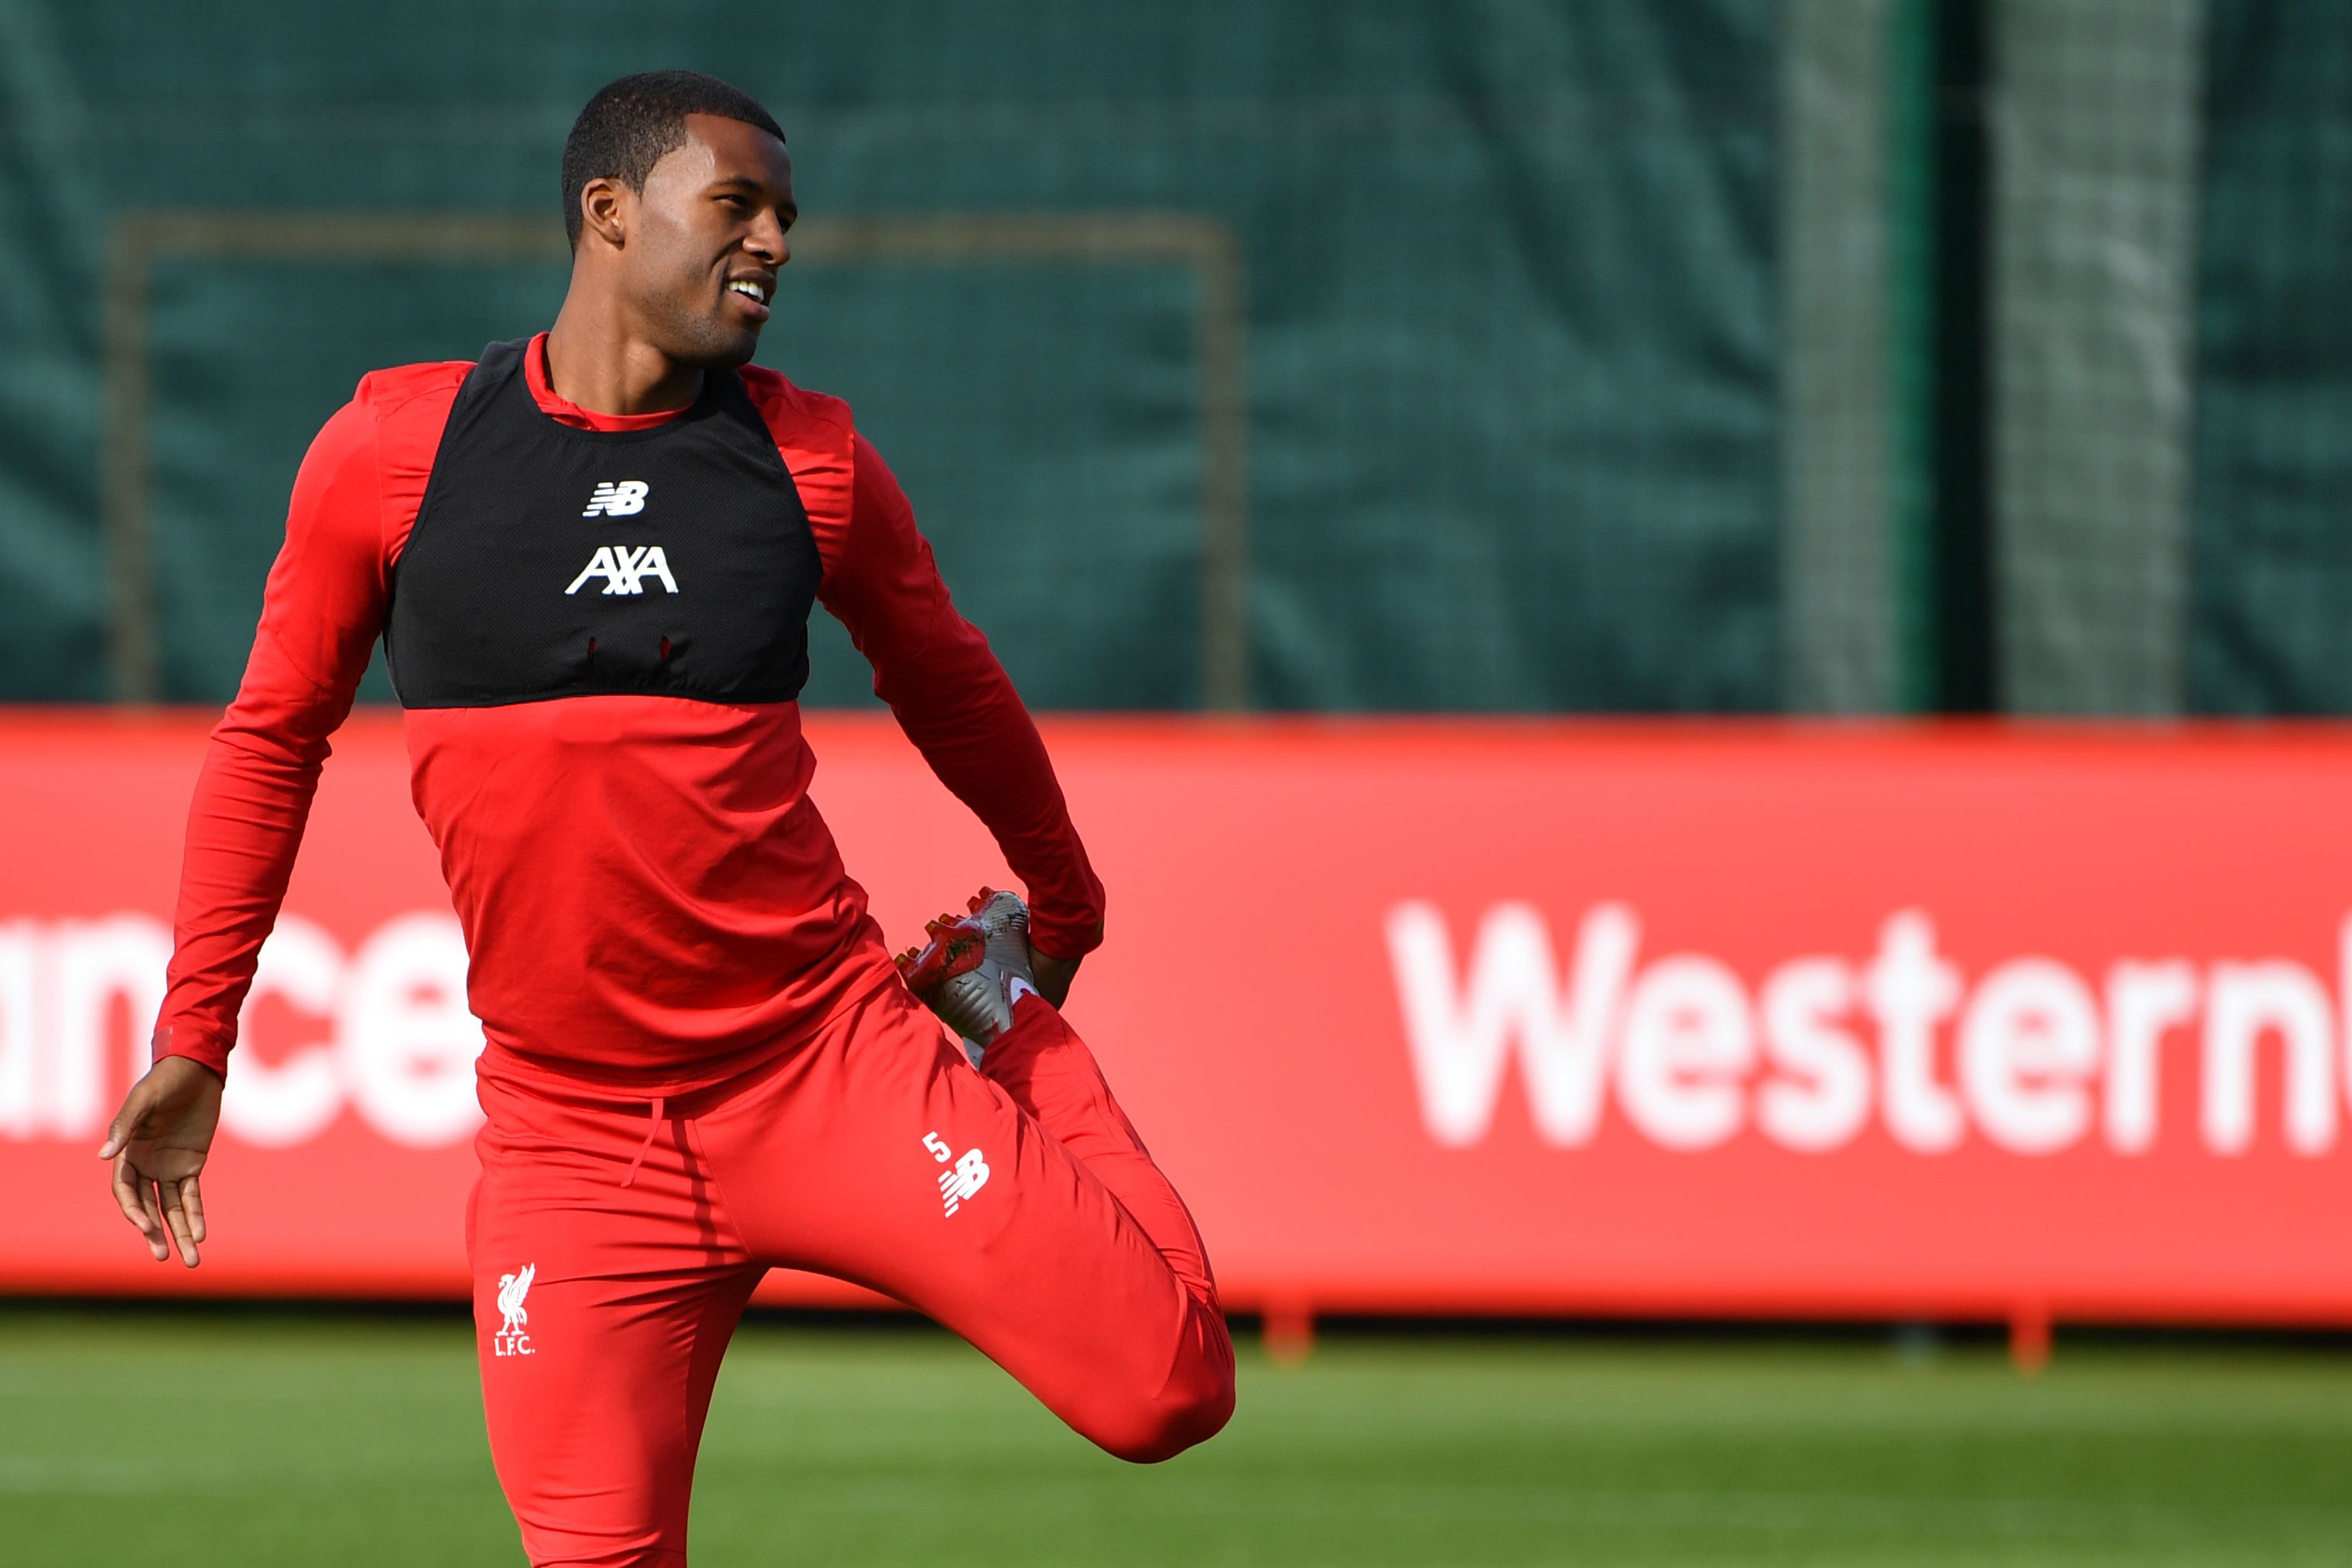 Liverpool's Dutch midfielder Georginio Wijnaldum takes part in a training session at their Melwood complex, Liverpool, north west England on the eve of their Champions league group stage football match against Napoli on September 16, 2019. (Photo by Paul ELLIS / AFP)        (Photo credit should read PAUL ELLIS/AFP/Getty Images)